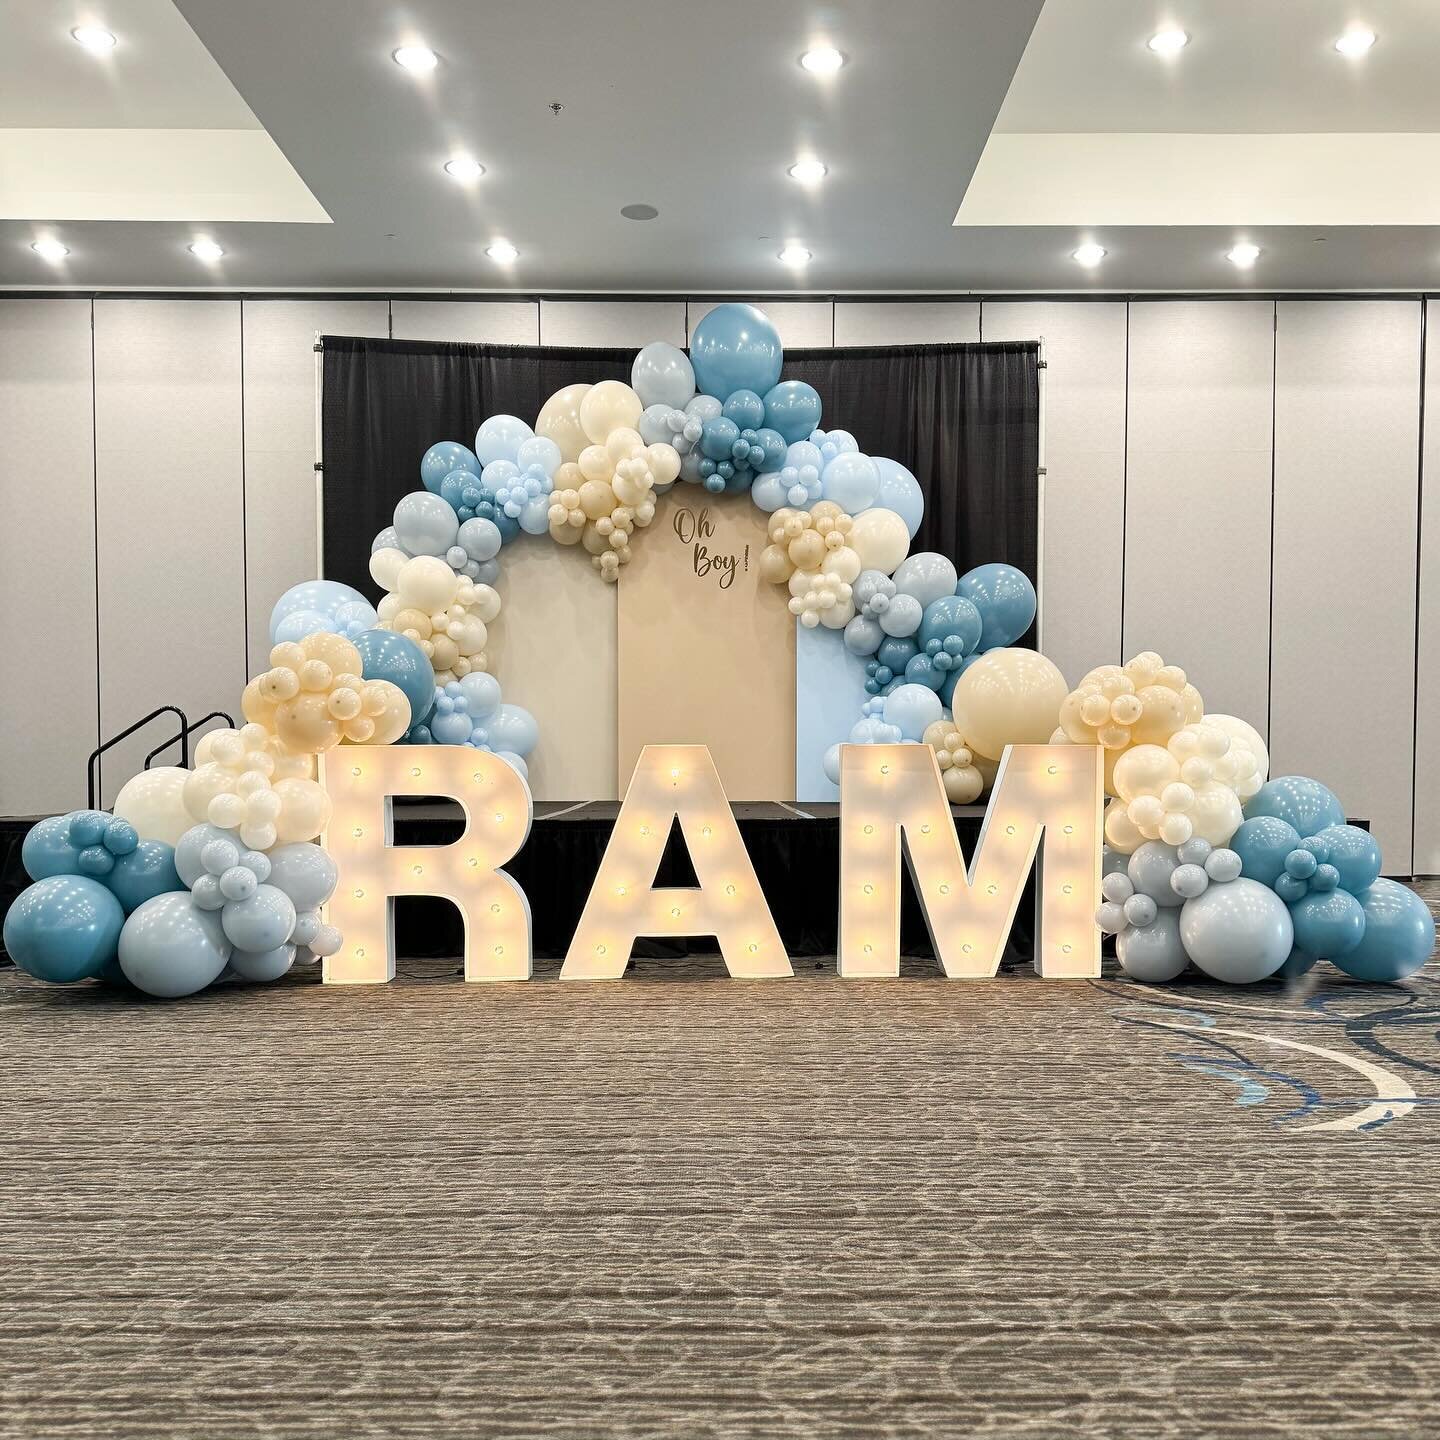 Welcoming baby Ram into the world 🩵
MARQUEE LETTERS: @lonestarmarquee